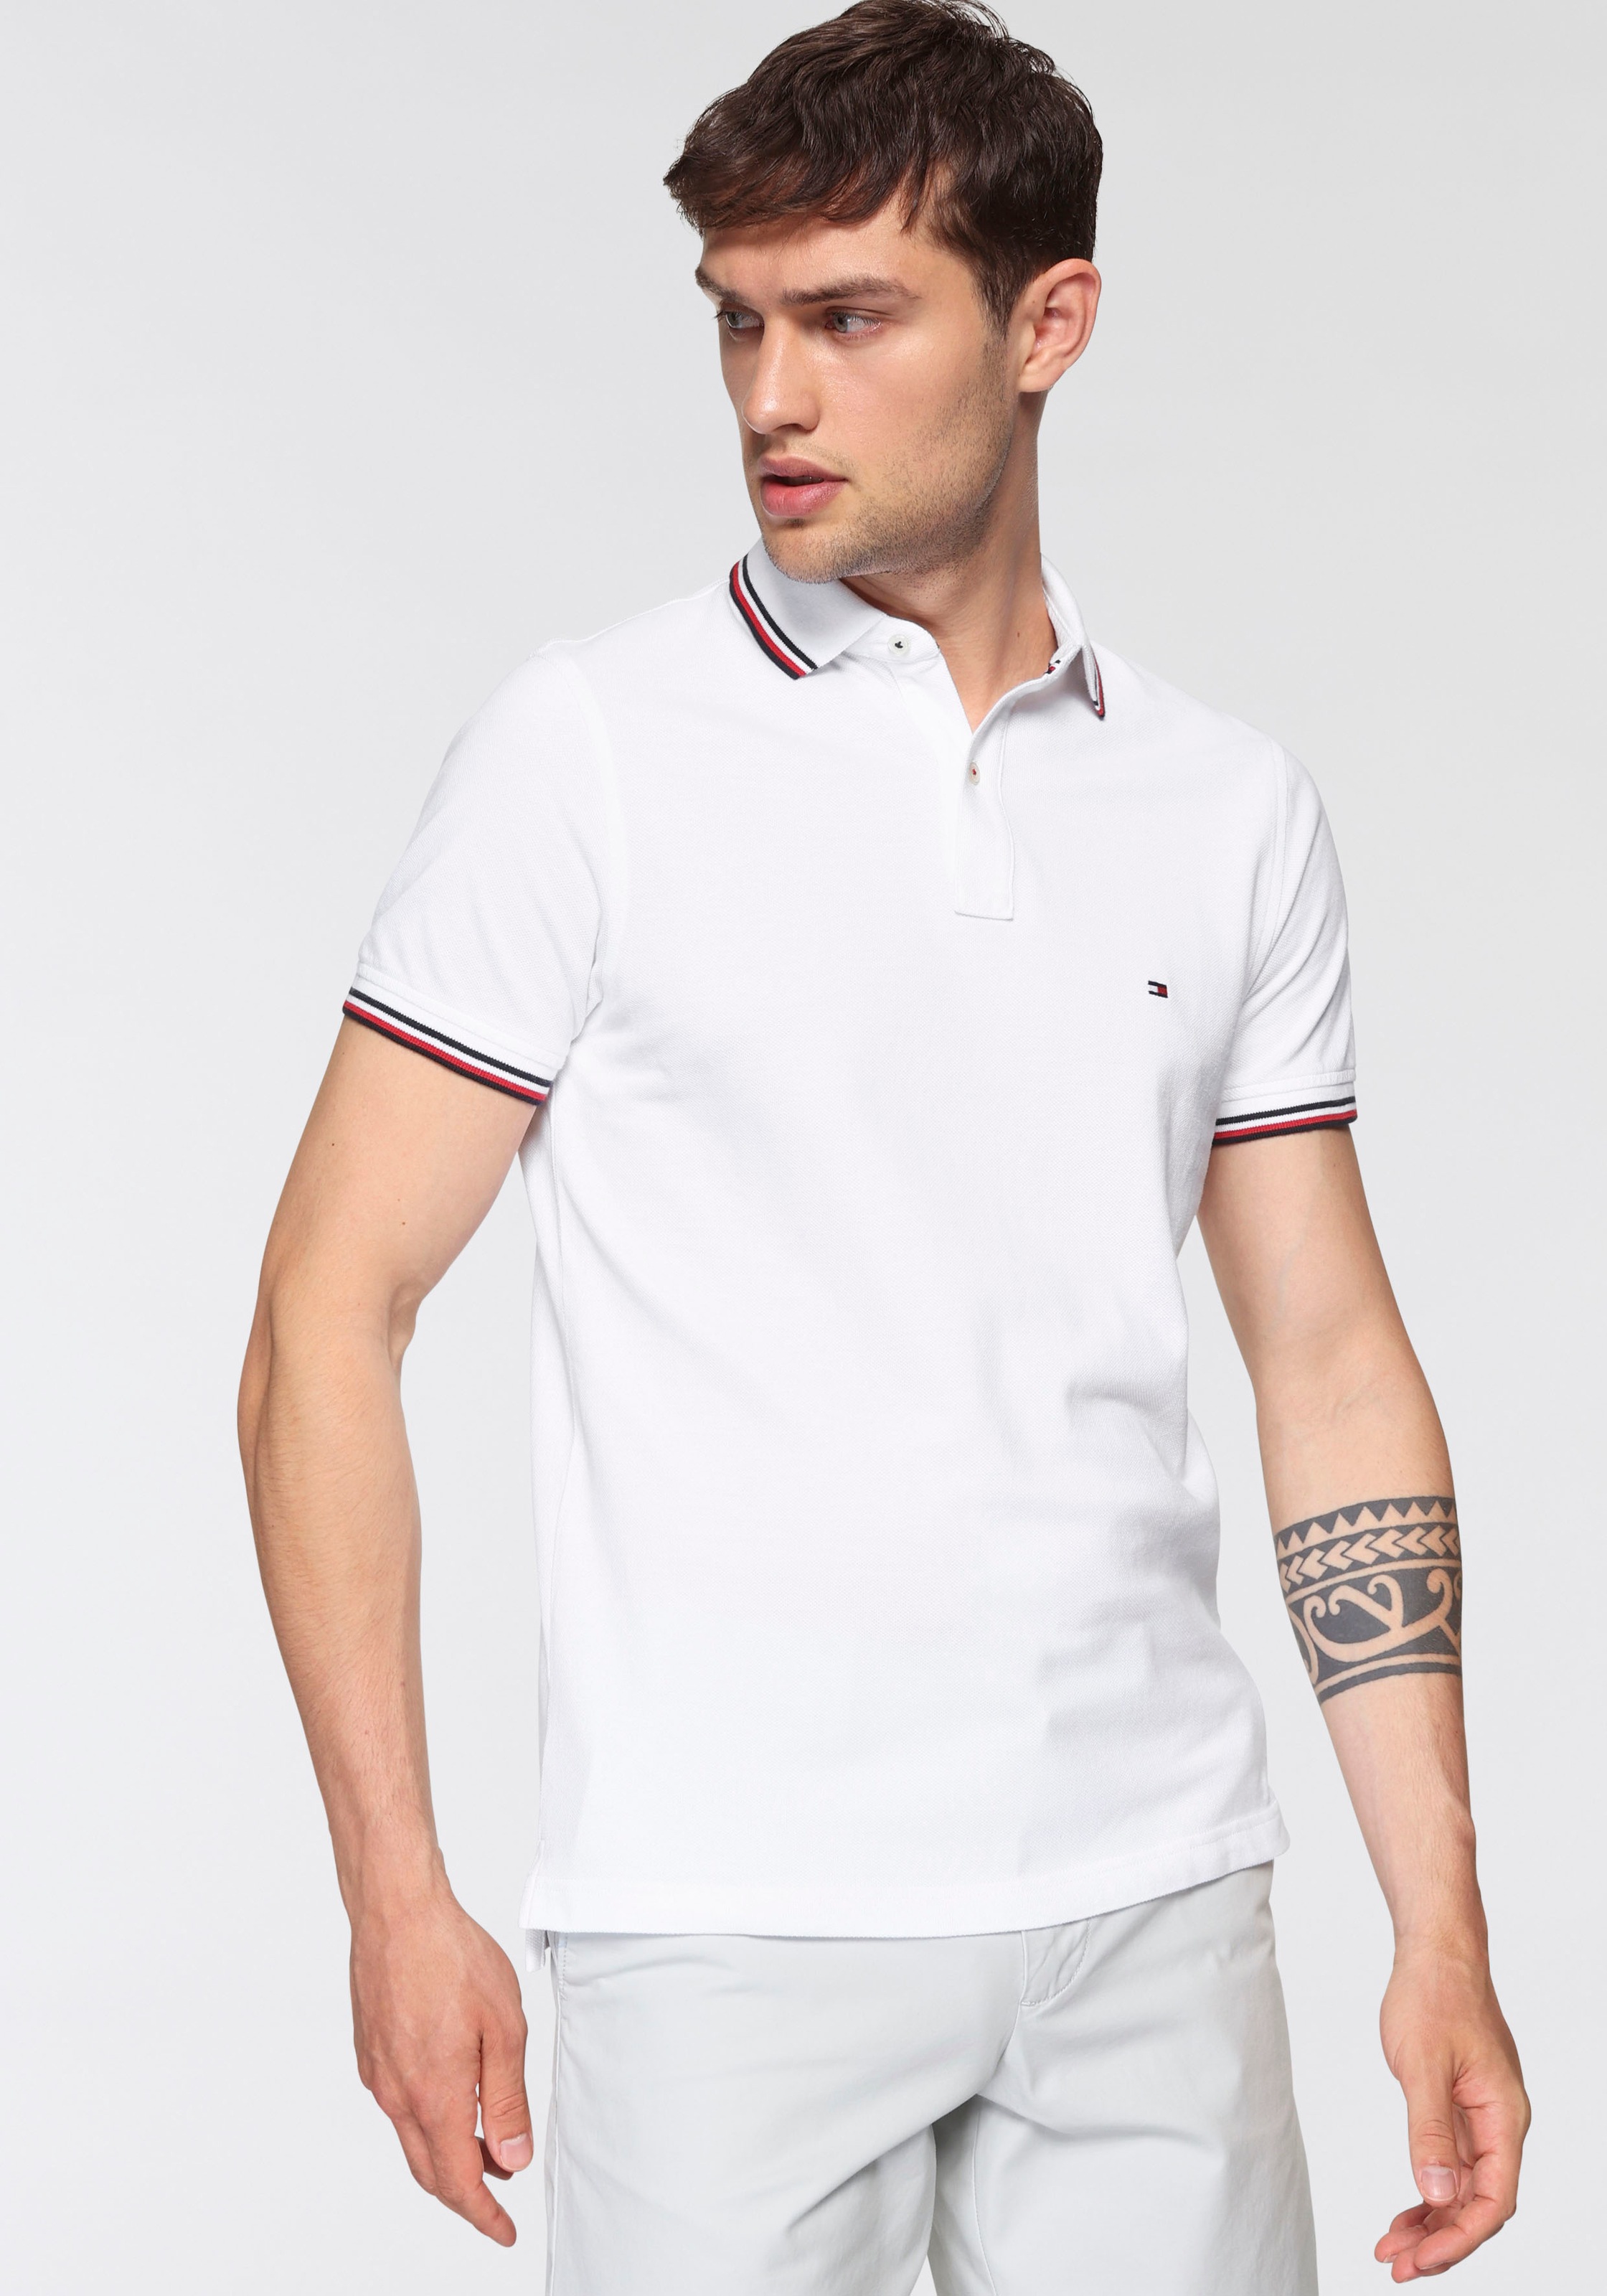 Tommy Hilfiger Poloshirt »TOMMY online TIPPED bestellen POLO« SLIM